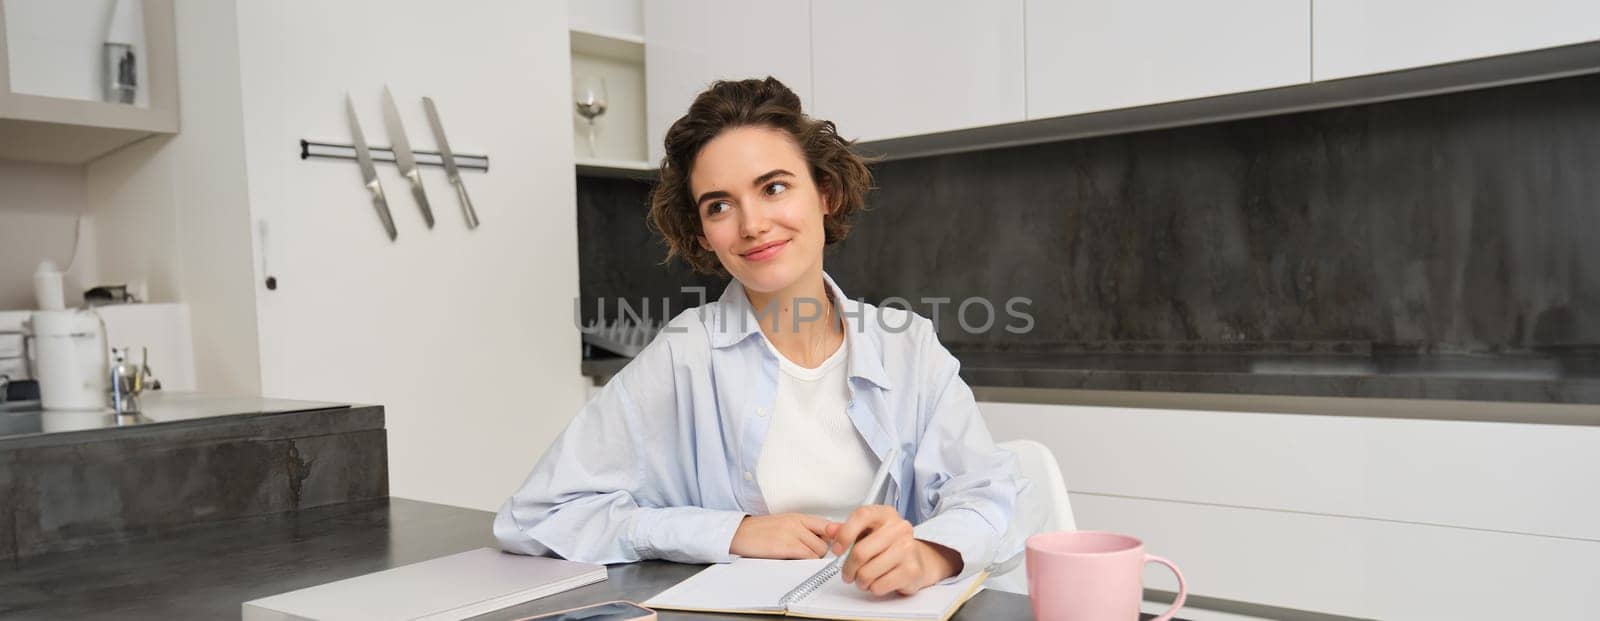 Portrait of young woman at home, working, writing in notebook, taking notes or doing homework.